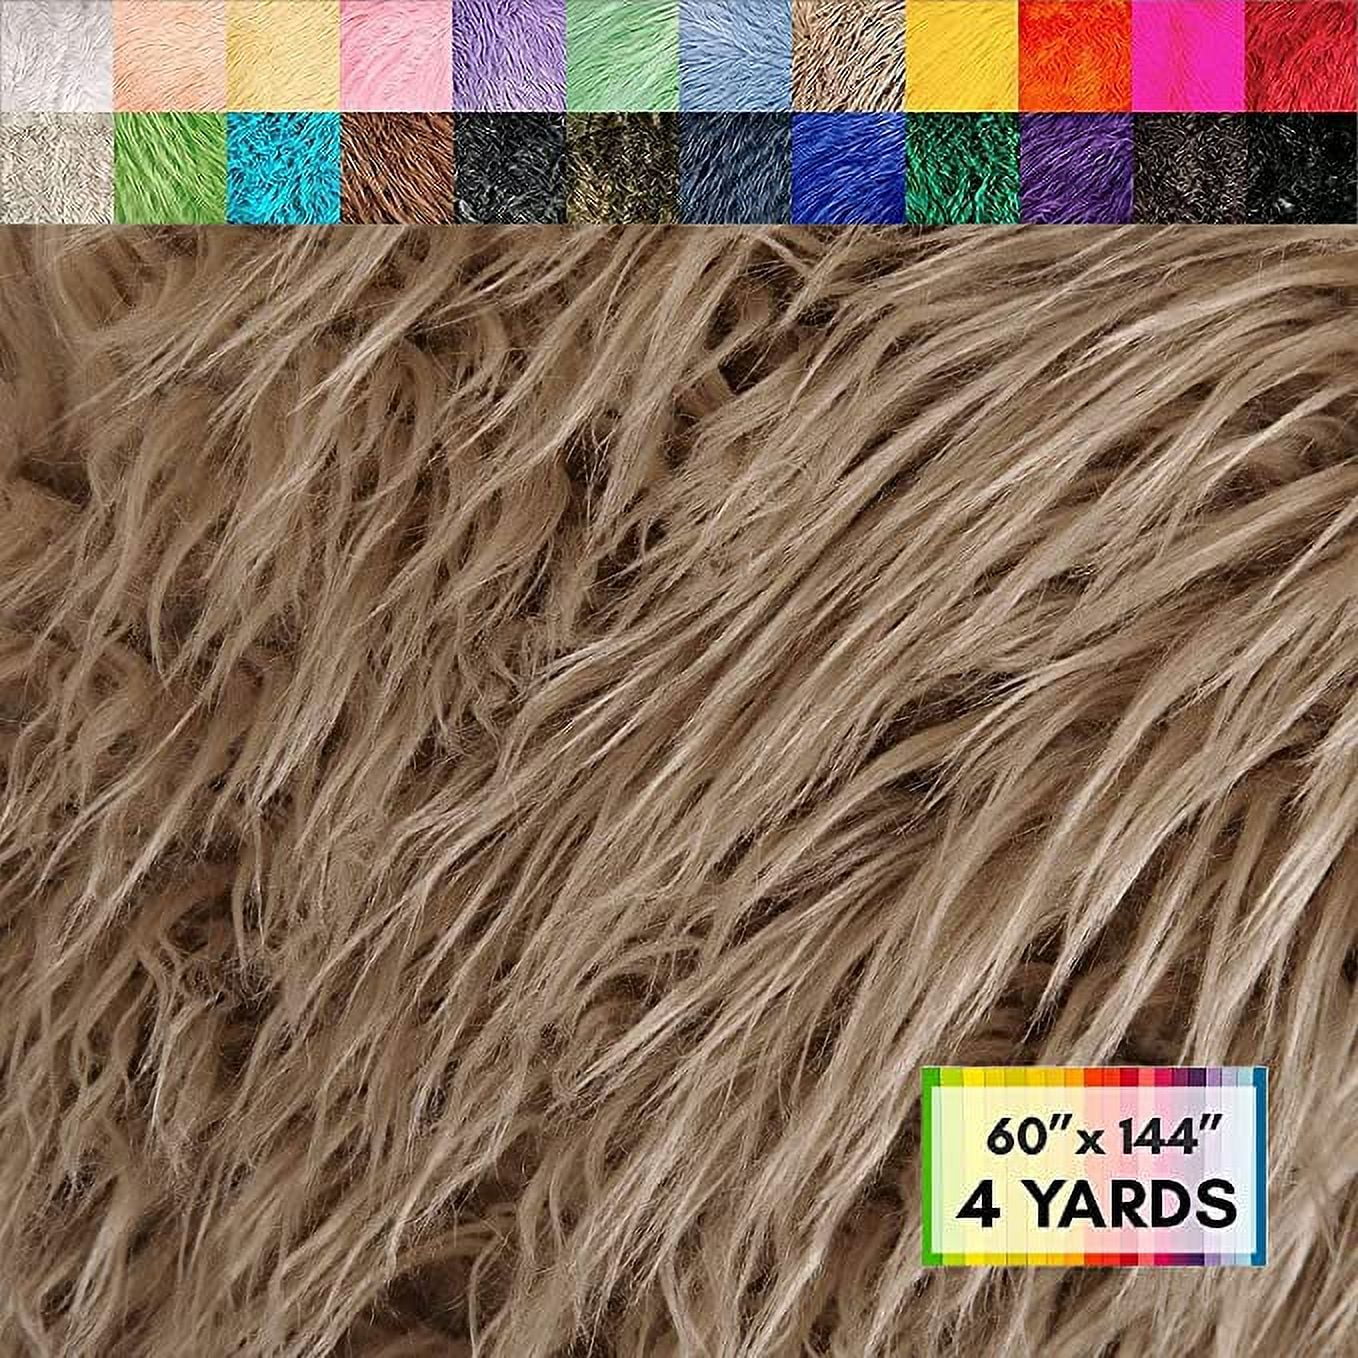 FabricLA Shaggy Faux Fur by The Yard | 108 inch x 60 inch | Craft & Hobby Supply for DIY Coats, Home Decor, Apparel, Vests, Jackets, Rugs, Throw